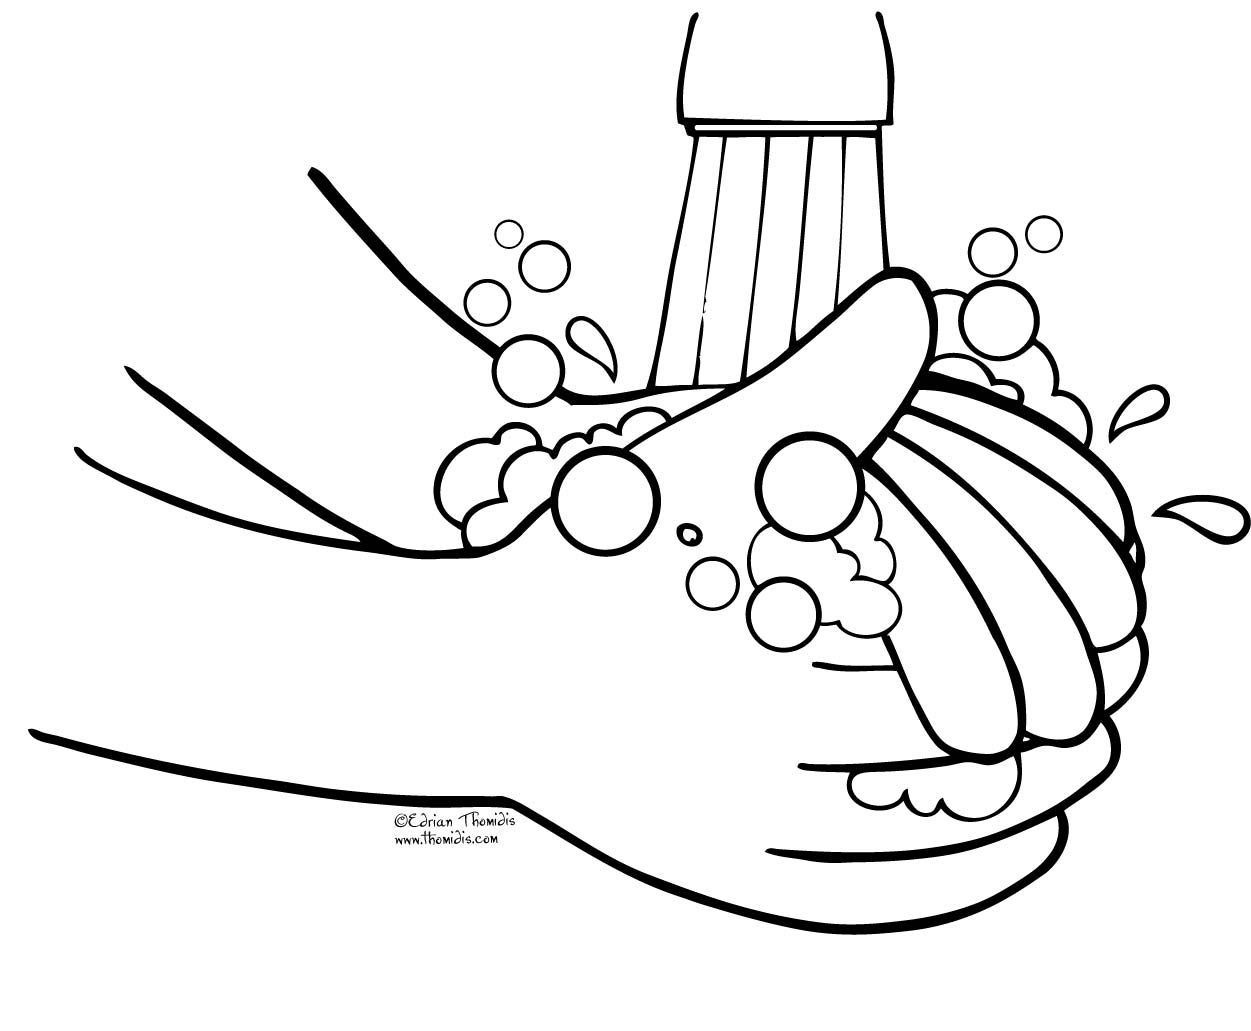 wash your hands coloring page printable pages | Hand washing poster, Coloring  pages, Color activities